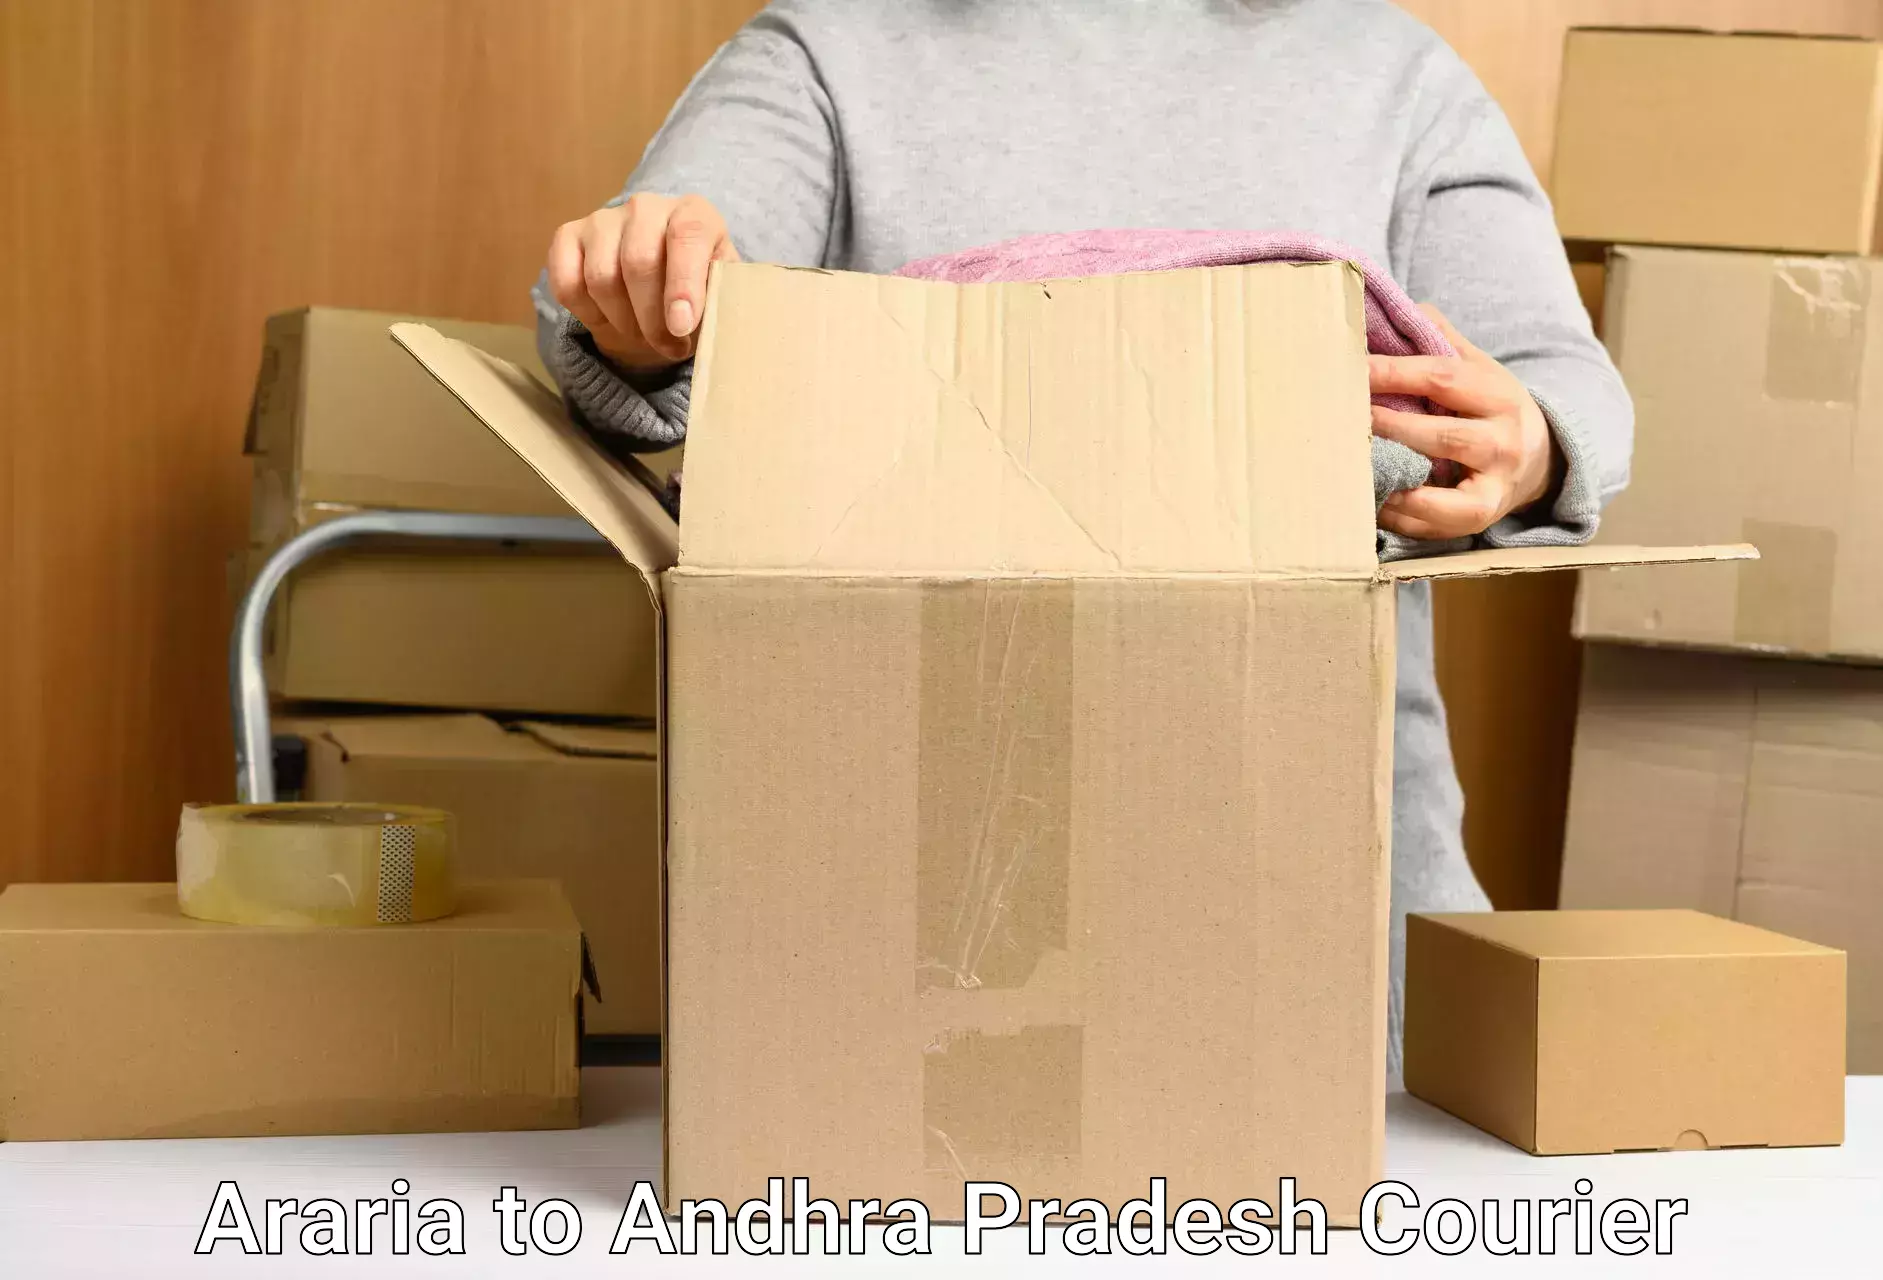 Urgent courier needs Araria to Addateegala